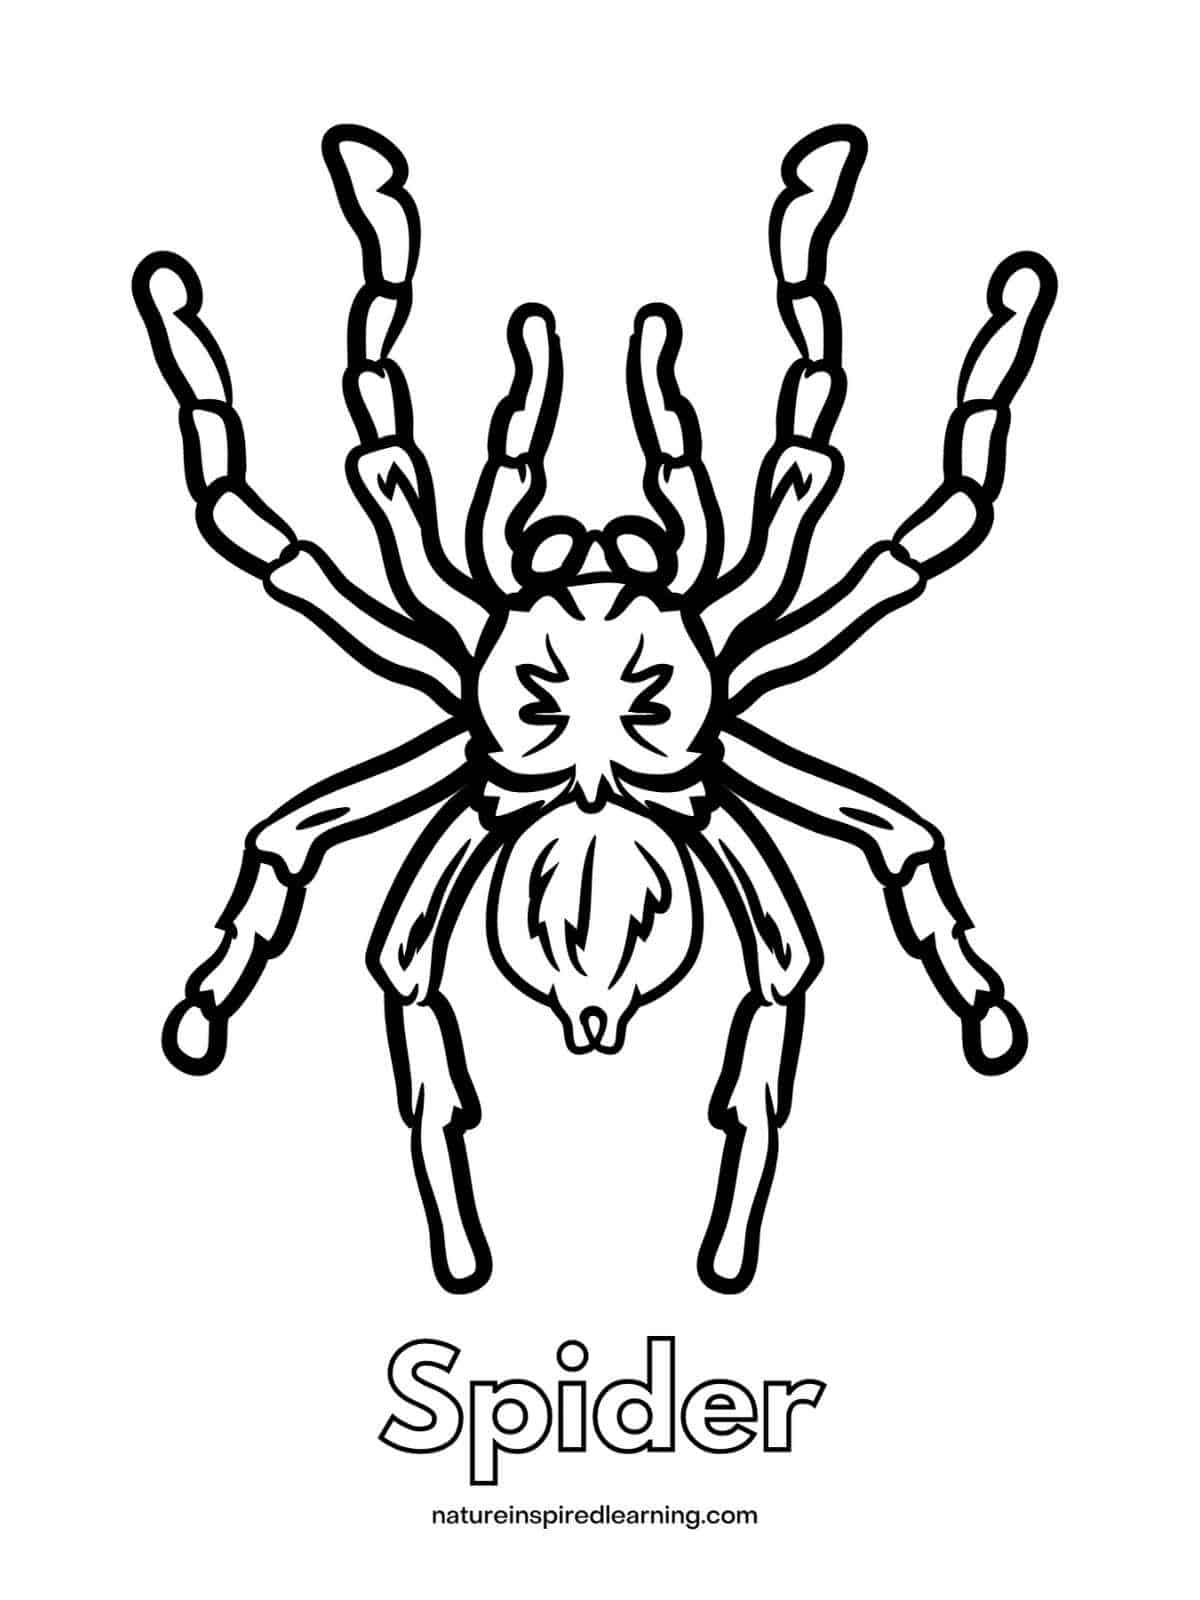 sheet with a large tarantula in the center with word Spider written below in outline form. Black and white design.